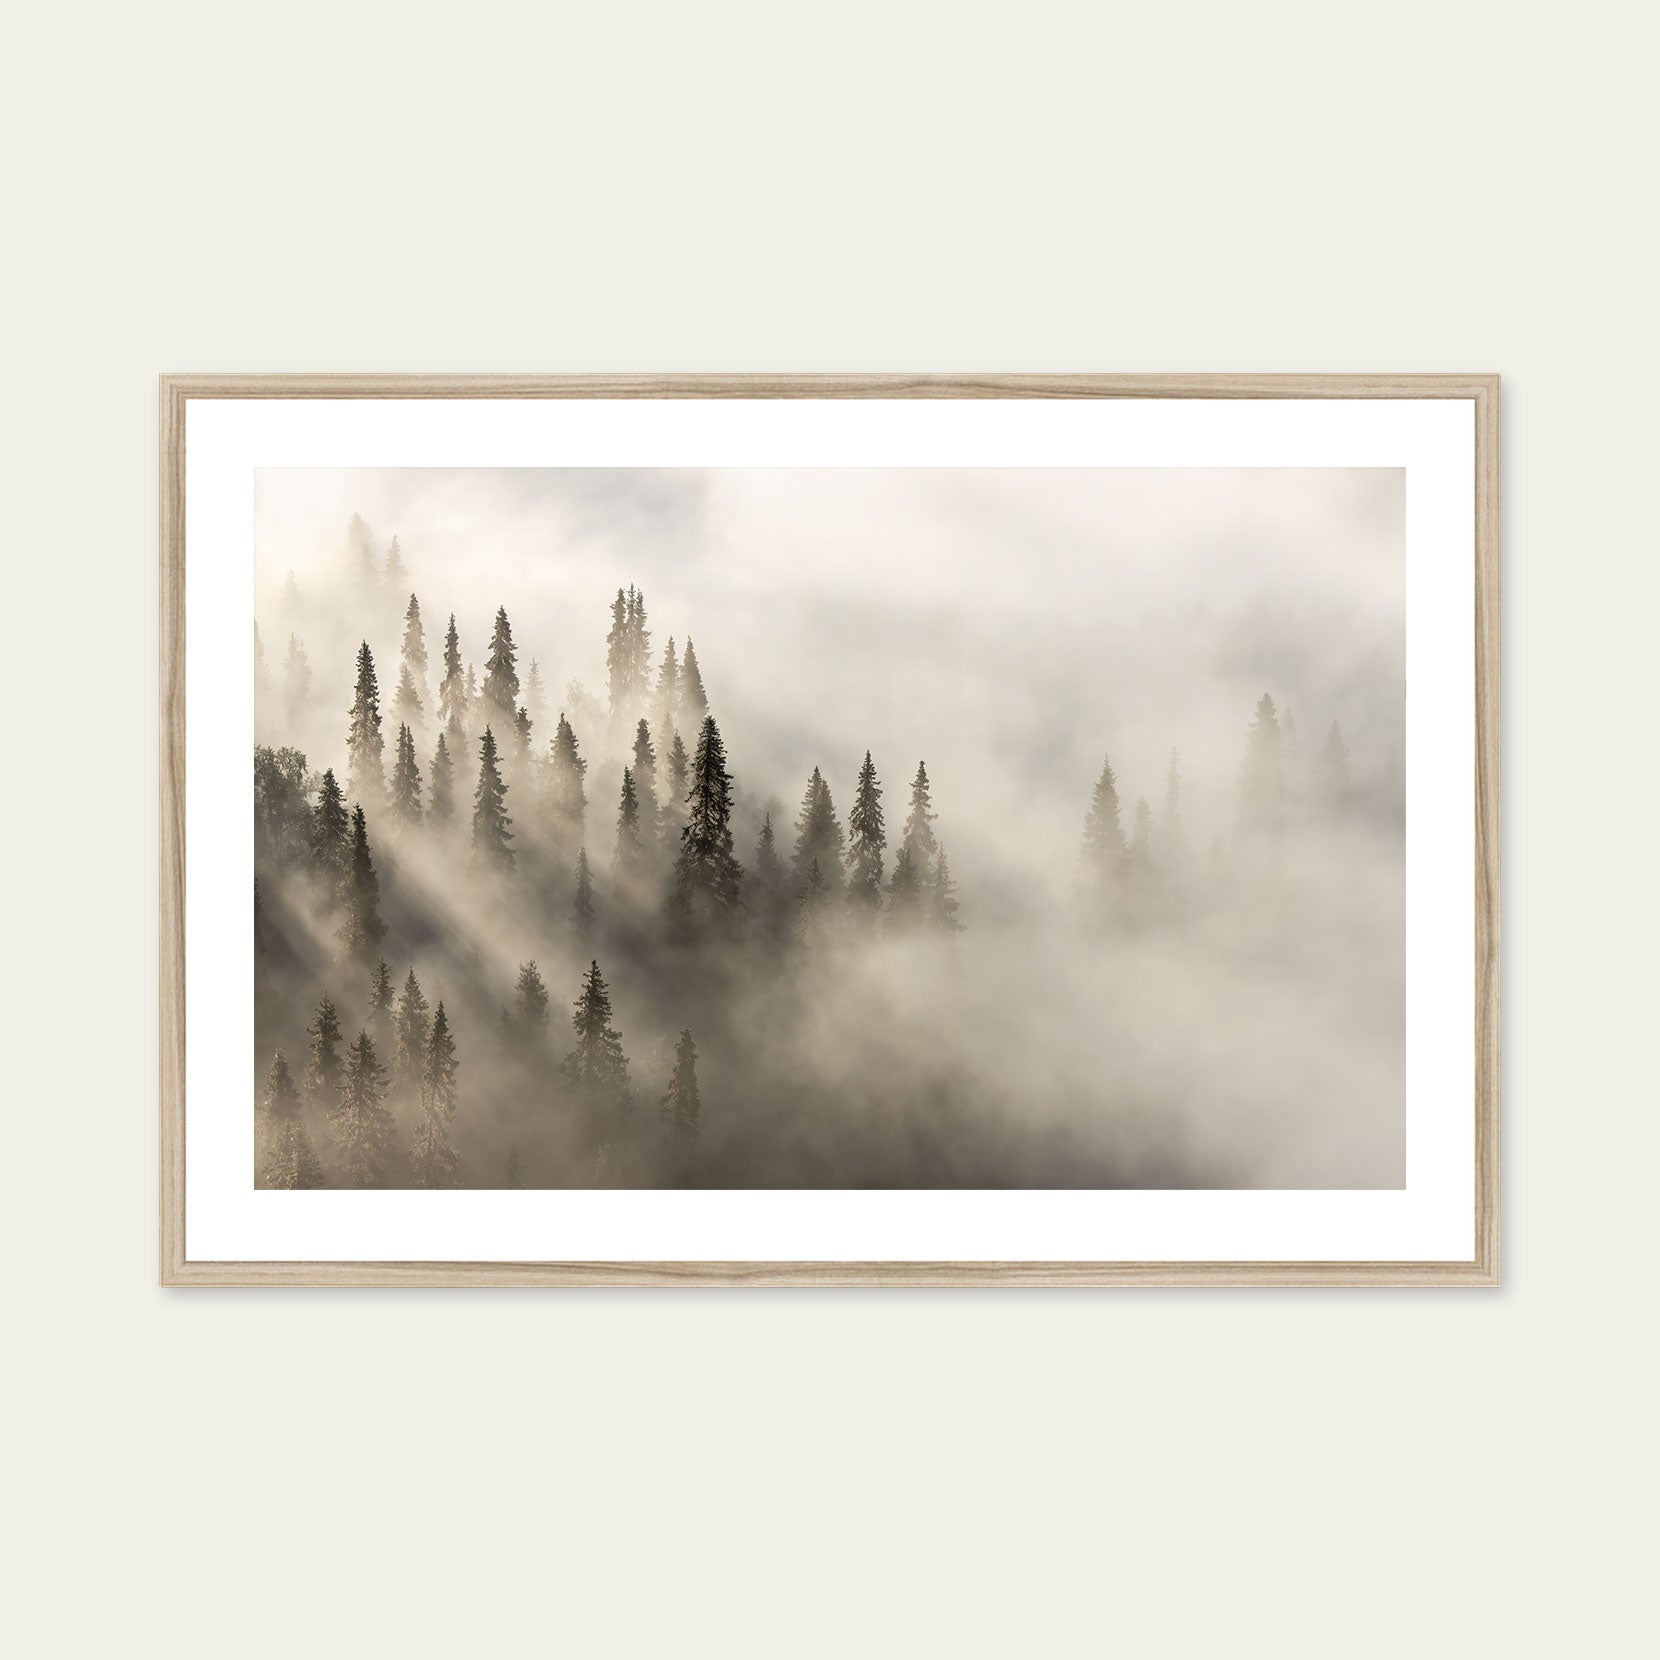 A wood framed print of a fog covered forest at dawn